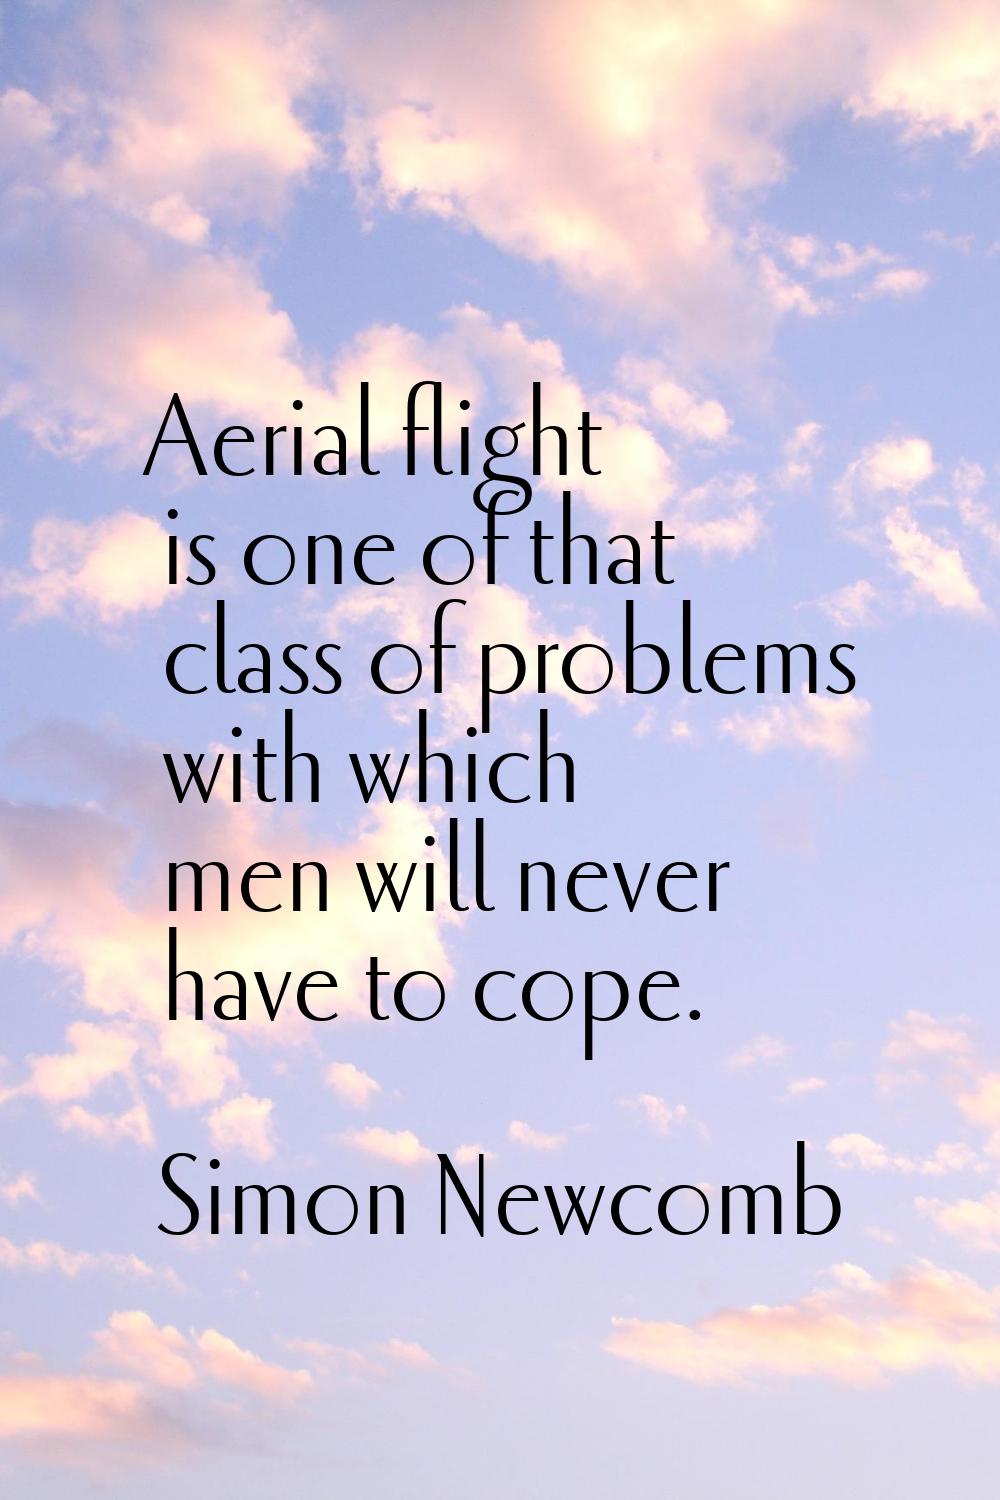 Aerial flight is one of that class of problems with which men will never have to cope.